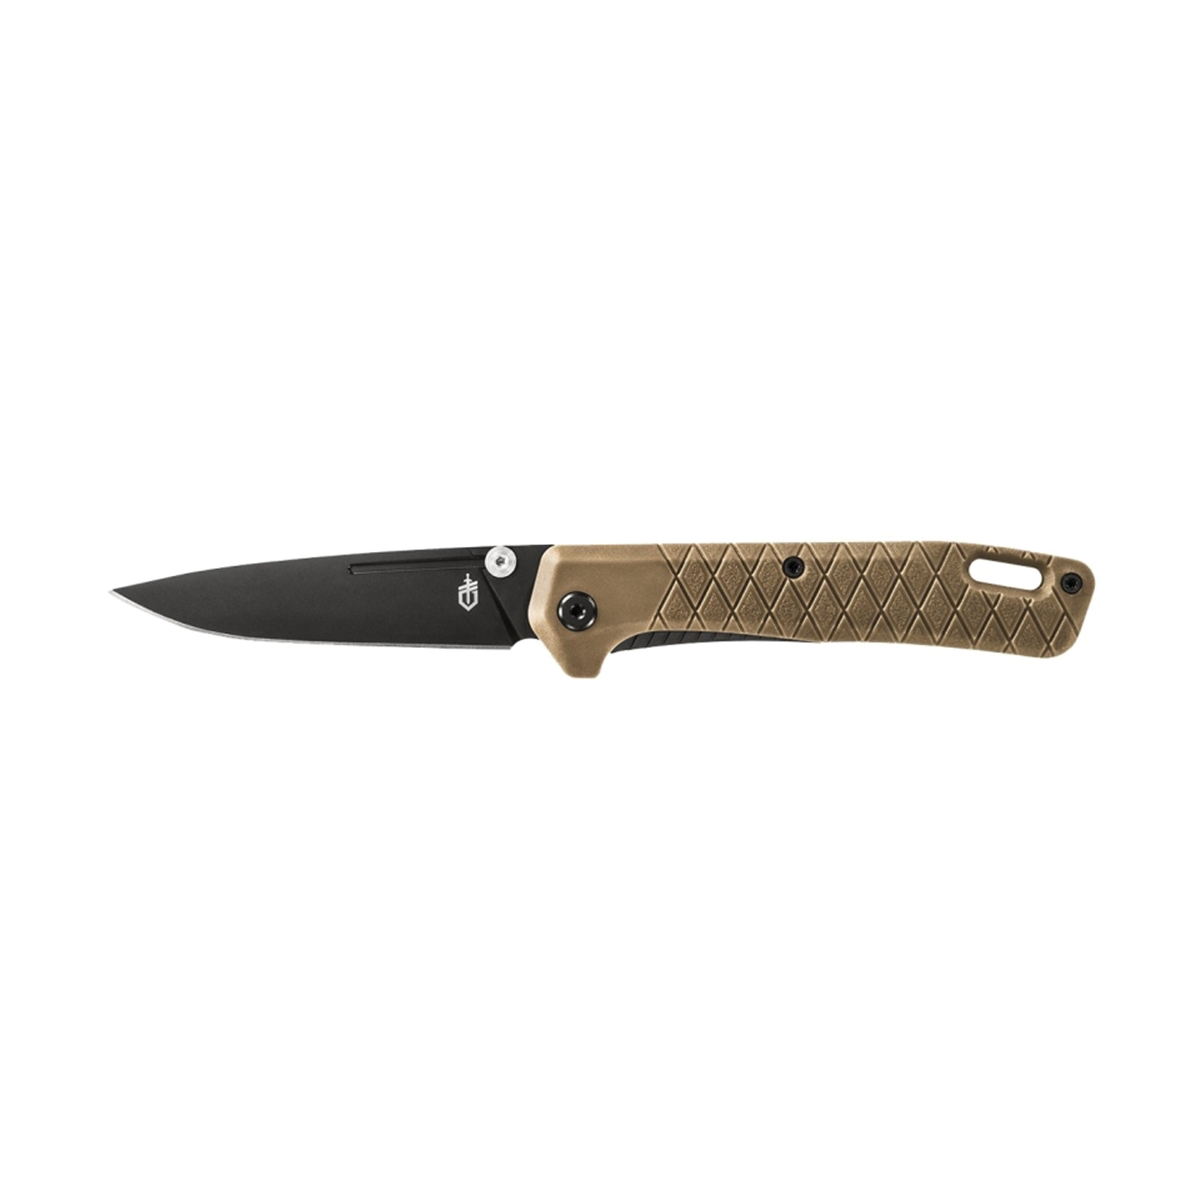 31-004068 Folding Knife, 3.1 in L Blade, Stainless Steel Blade, 1-Blade, Textured Handle, Coyote Brown Handle